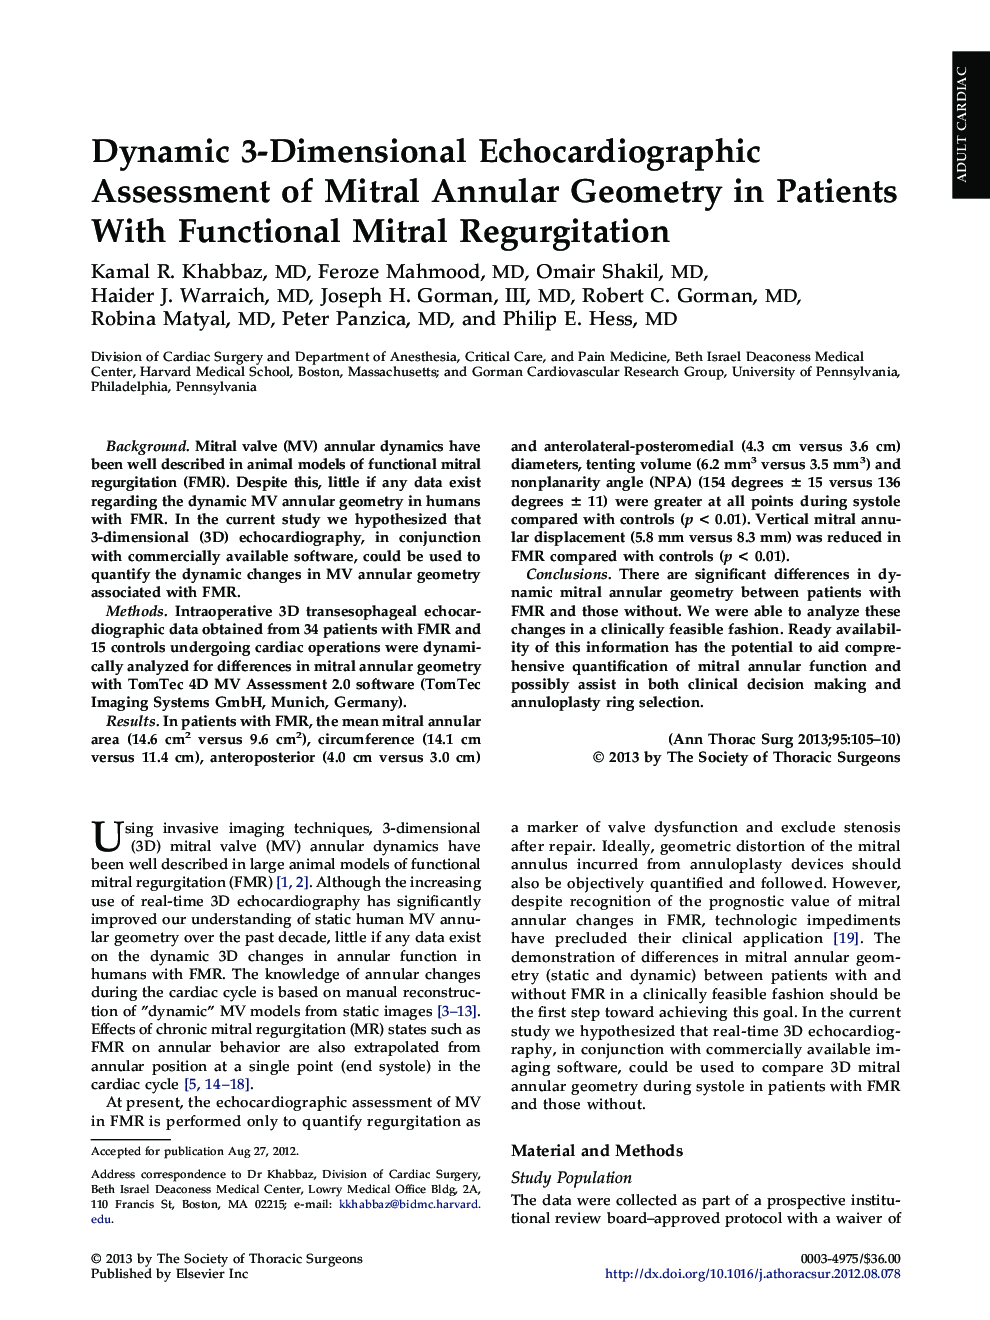 Dynamic 3-Dimensional Echocardiographic Assessment of Mitral Annular Geometry in Patients With Functional Mitral Regurgitation